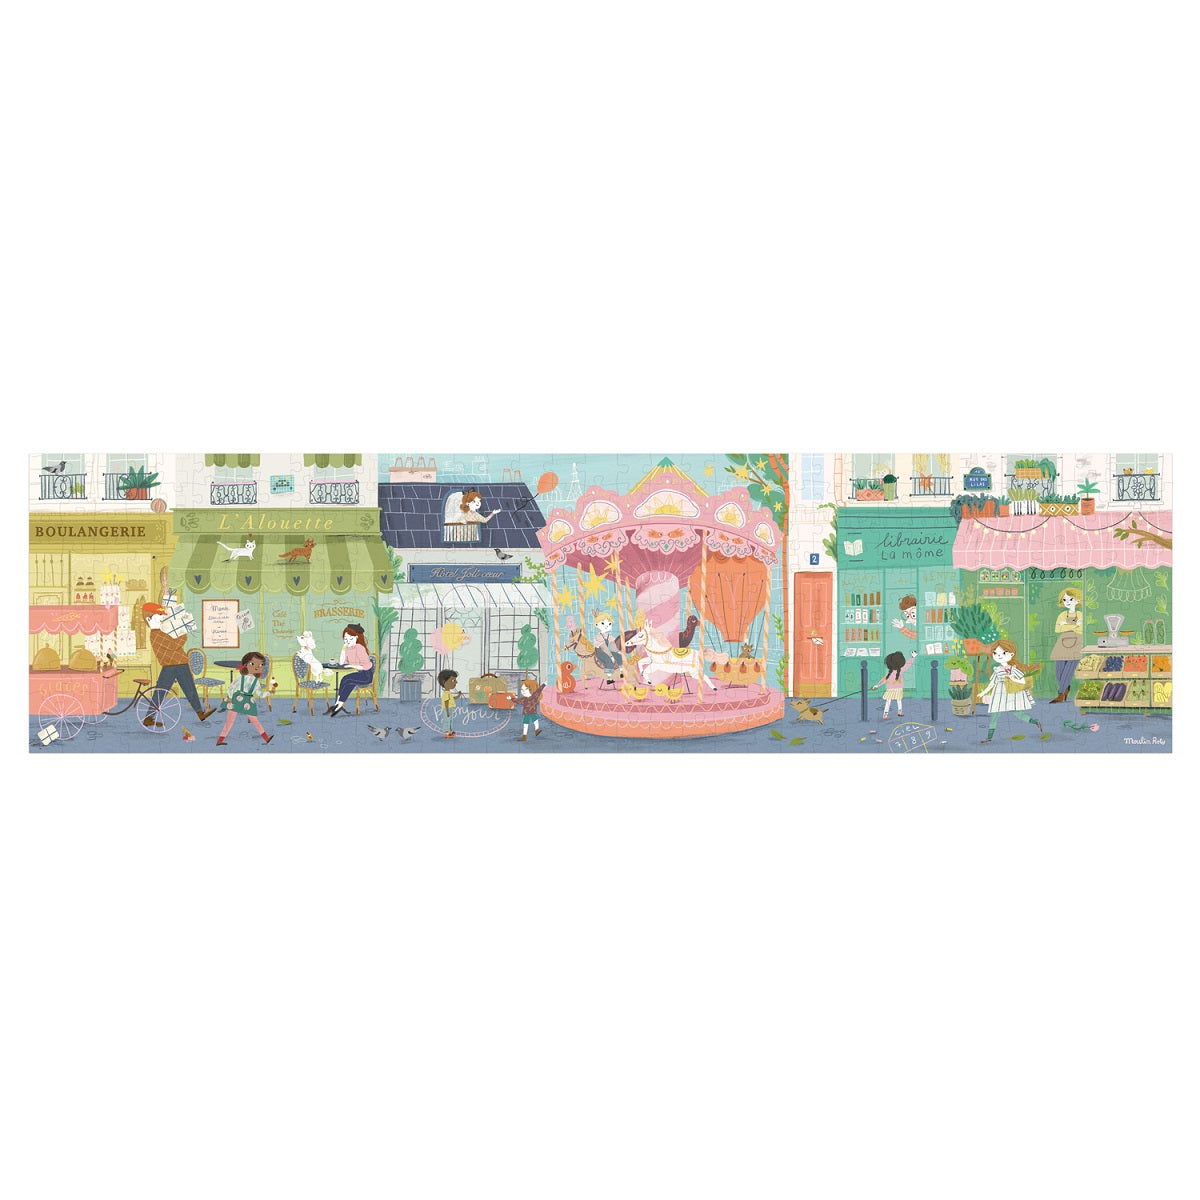 Parisiennes - 10 Rue Des Lilas Puzzle 350 pcs By Lucille Michiell and Moulin Roty